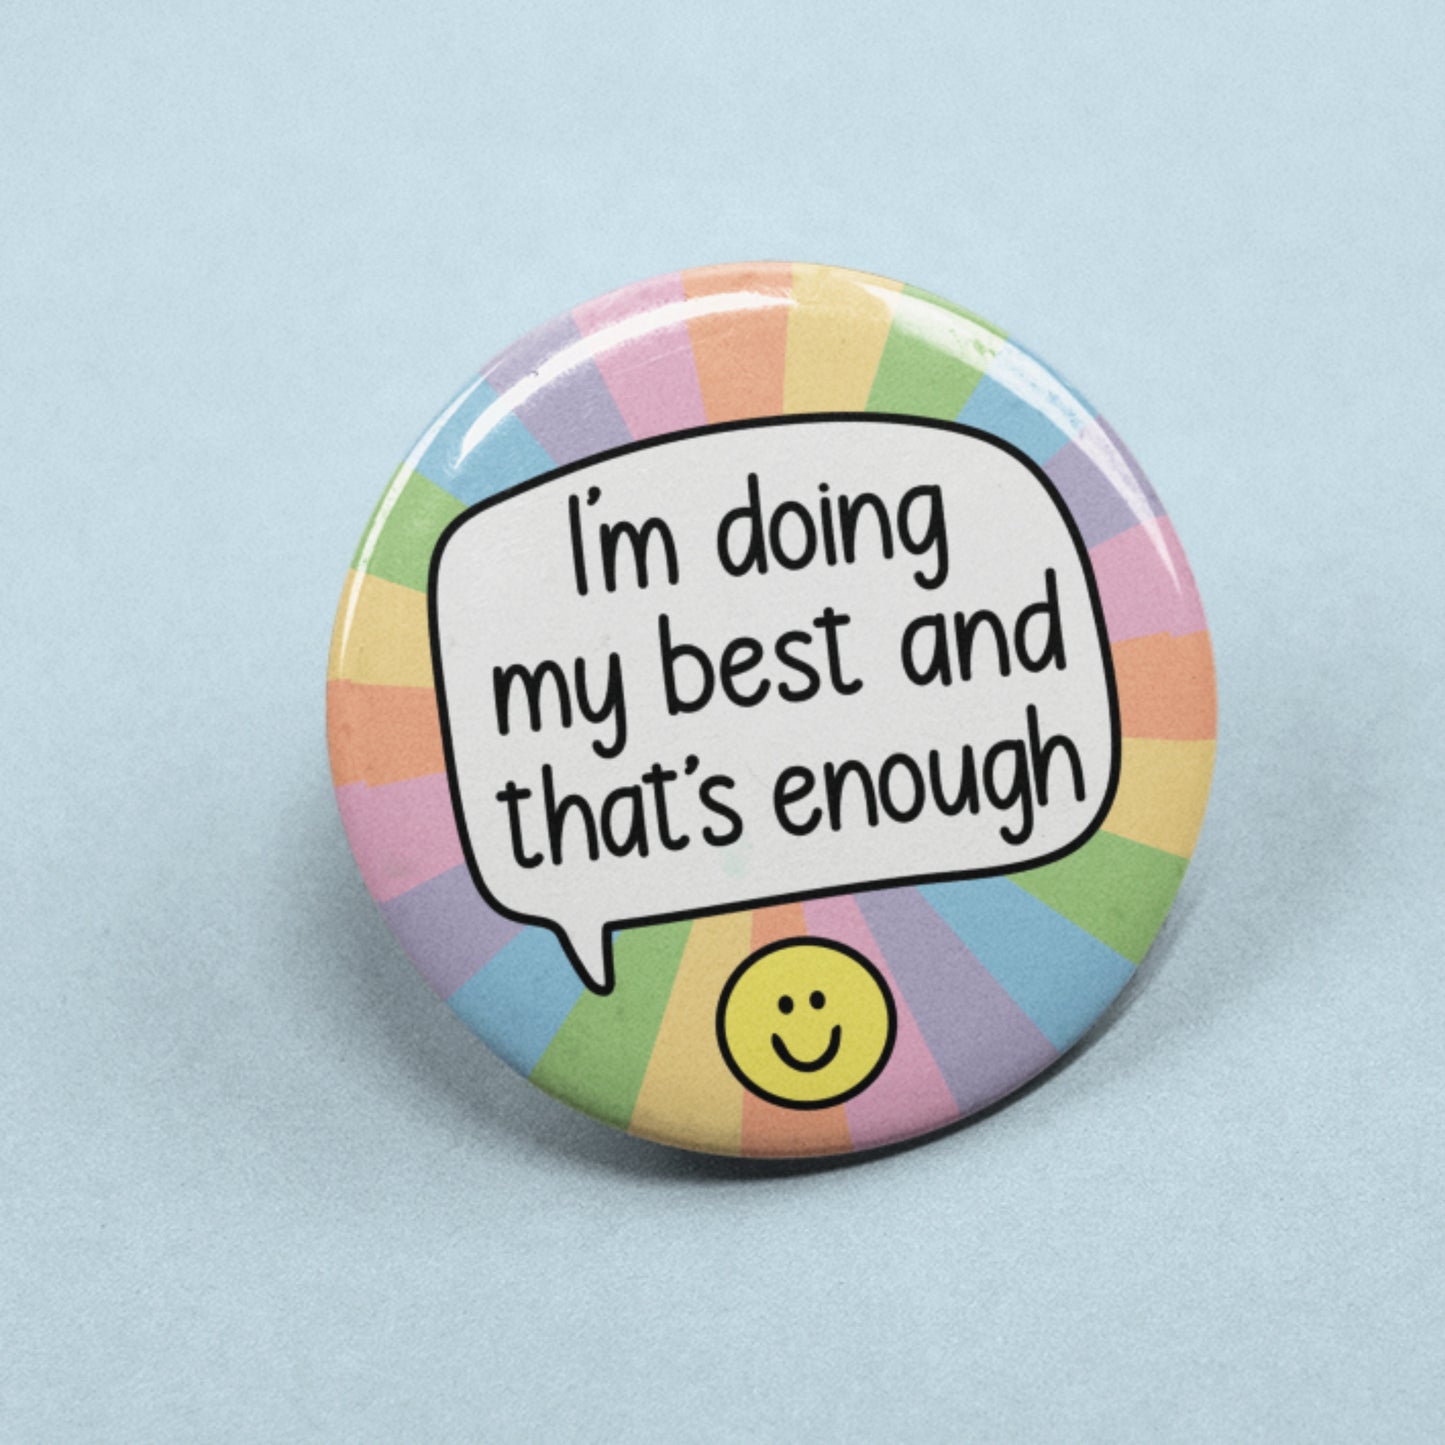 Doing My Best And That's Enough Speech Bubble - Pin Badge | Friendship Gift - Motivational - Positivity Quote - Self Love